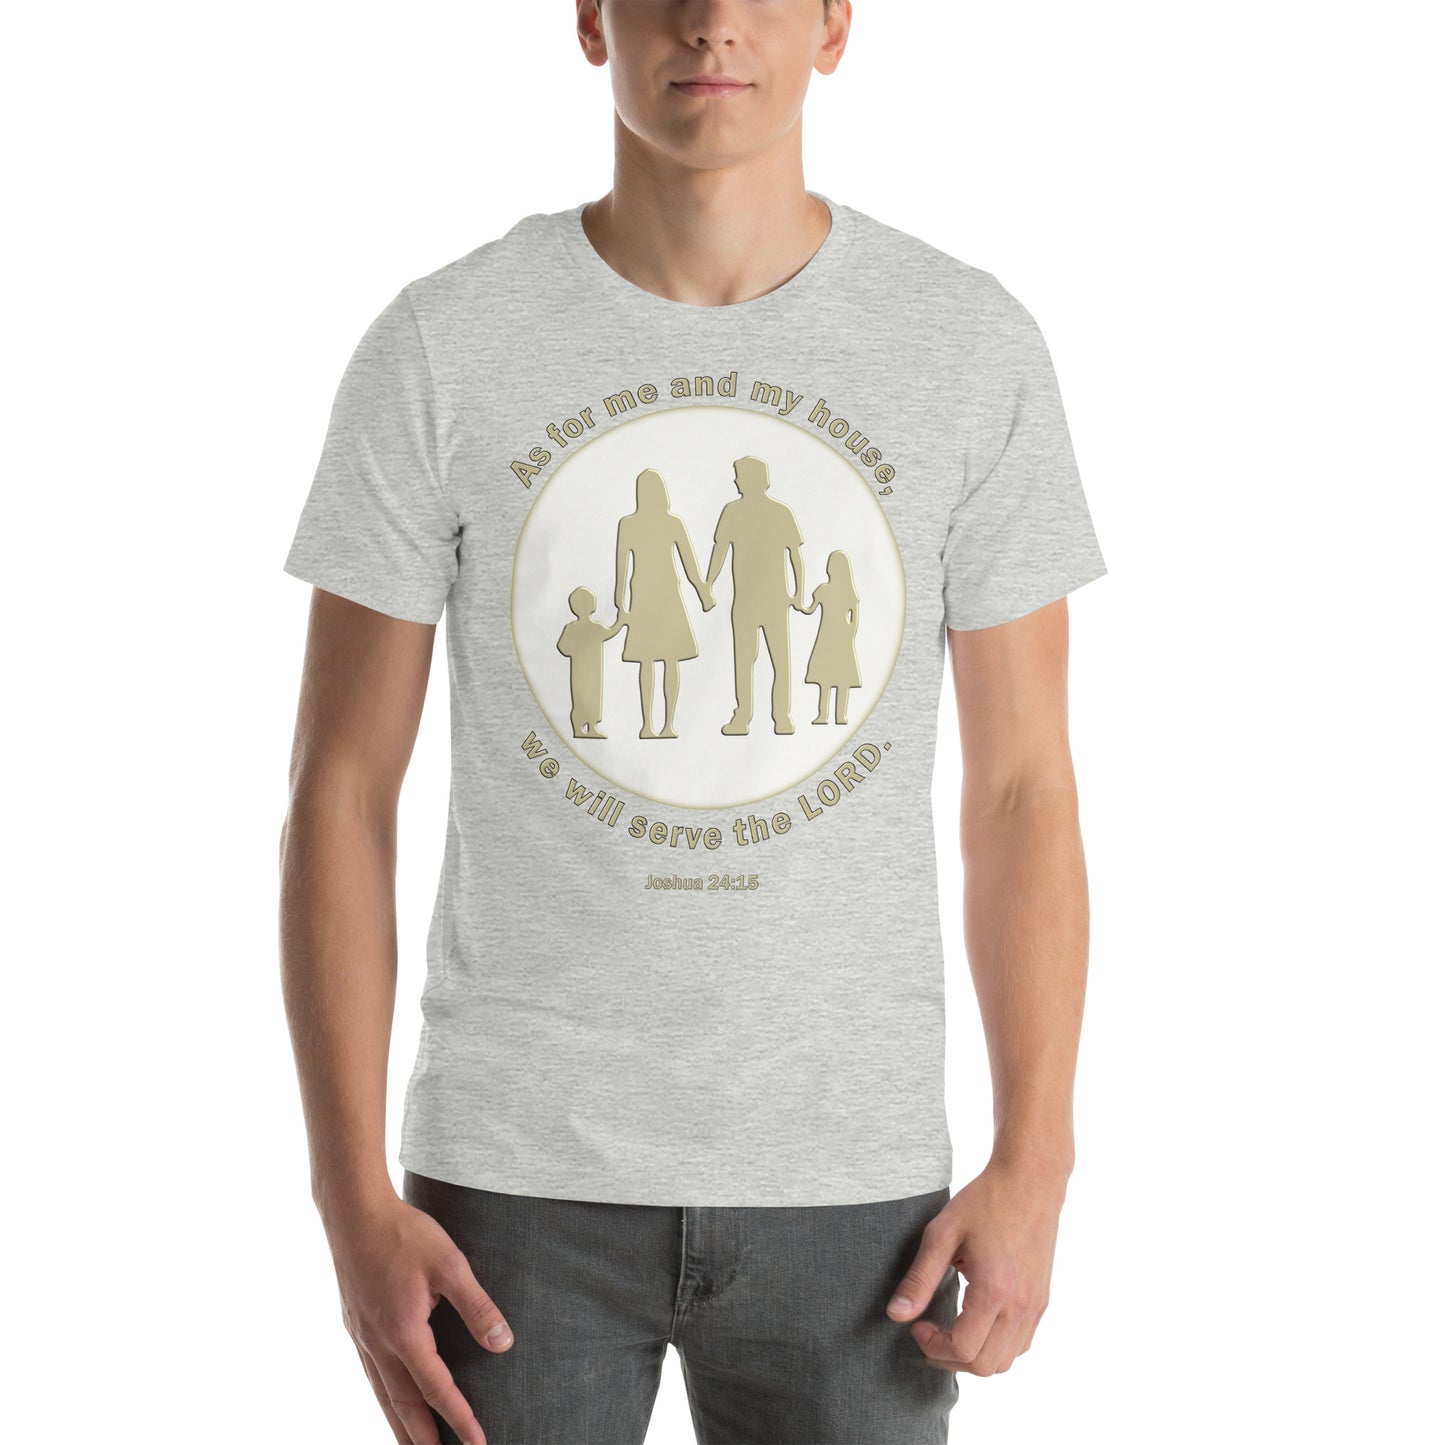 A014 T-shirt - Bella + Canvas 3001 Unisex T-shirt Featuring a Silhouette Graphic of a Young Family with the Text of Joshua 24 verse 15 “As for Me and My House, We Will Serve the LORD.”